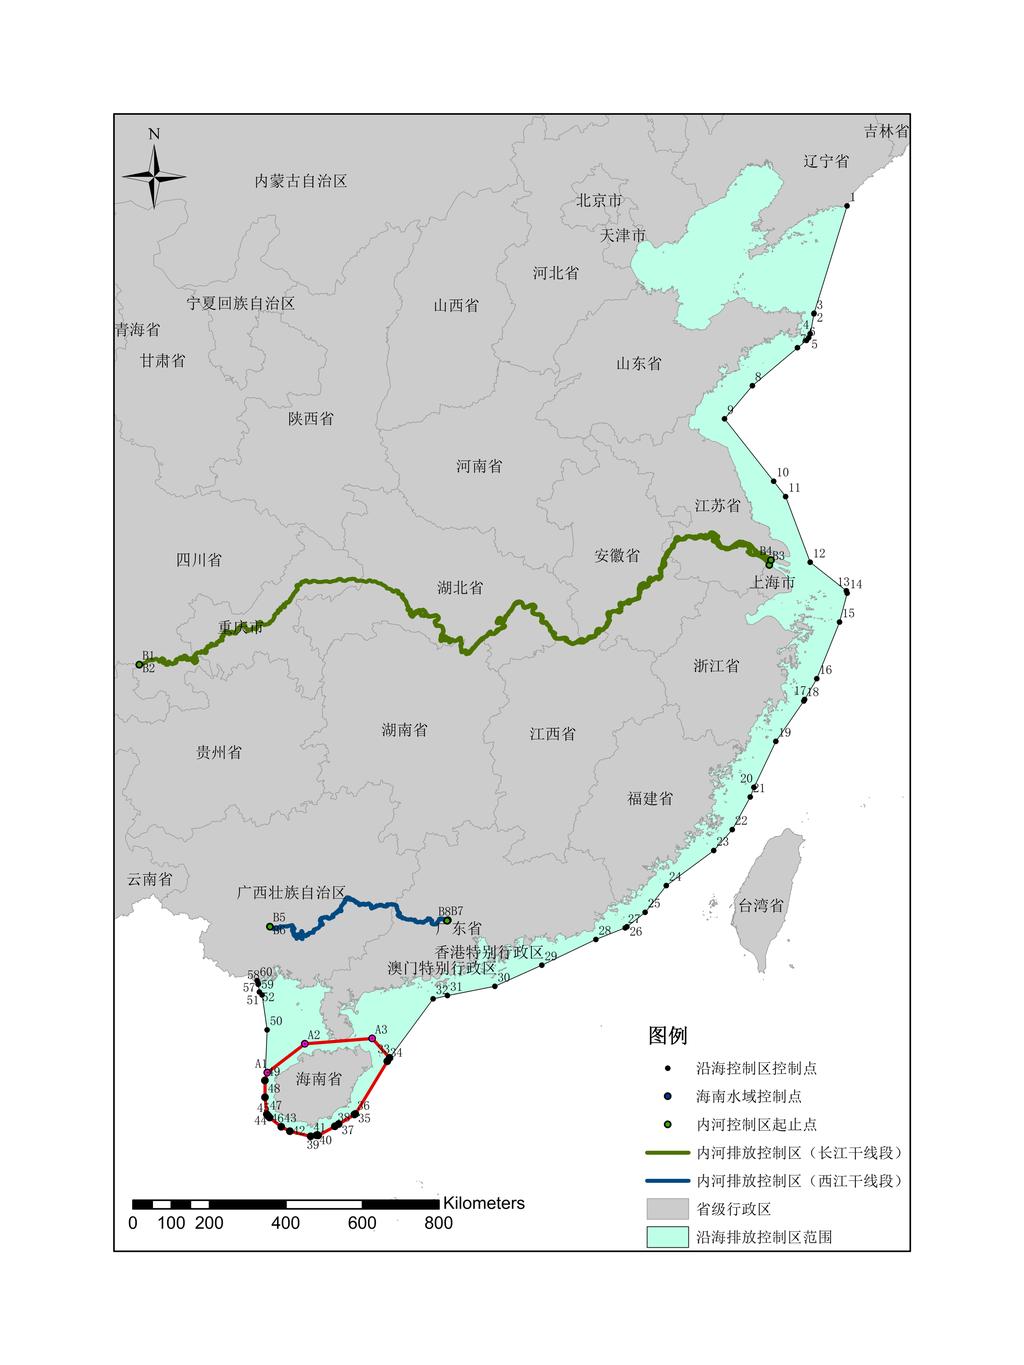 Legend Control points of coastal control area Control points of the Hainan Water Area Starting and Ending Point Locations in Inland River Control Area Inland River DECA (Yangtze River